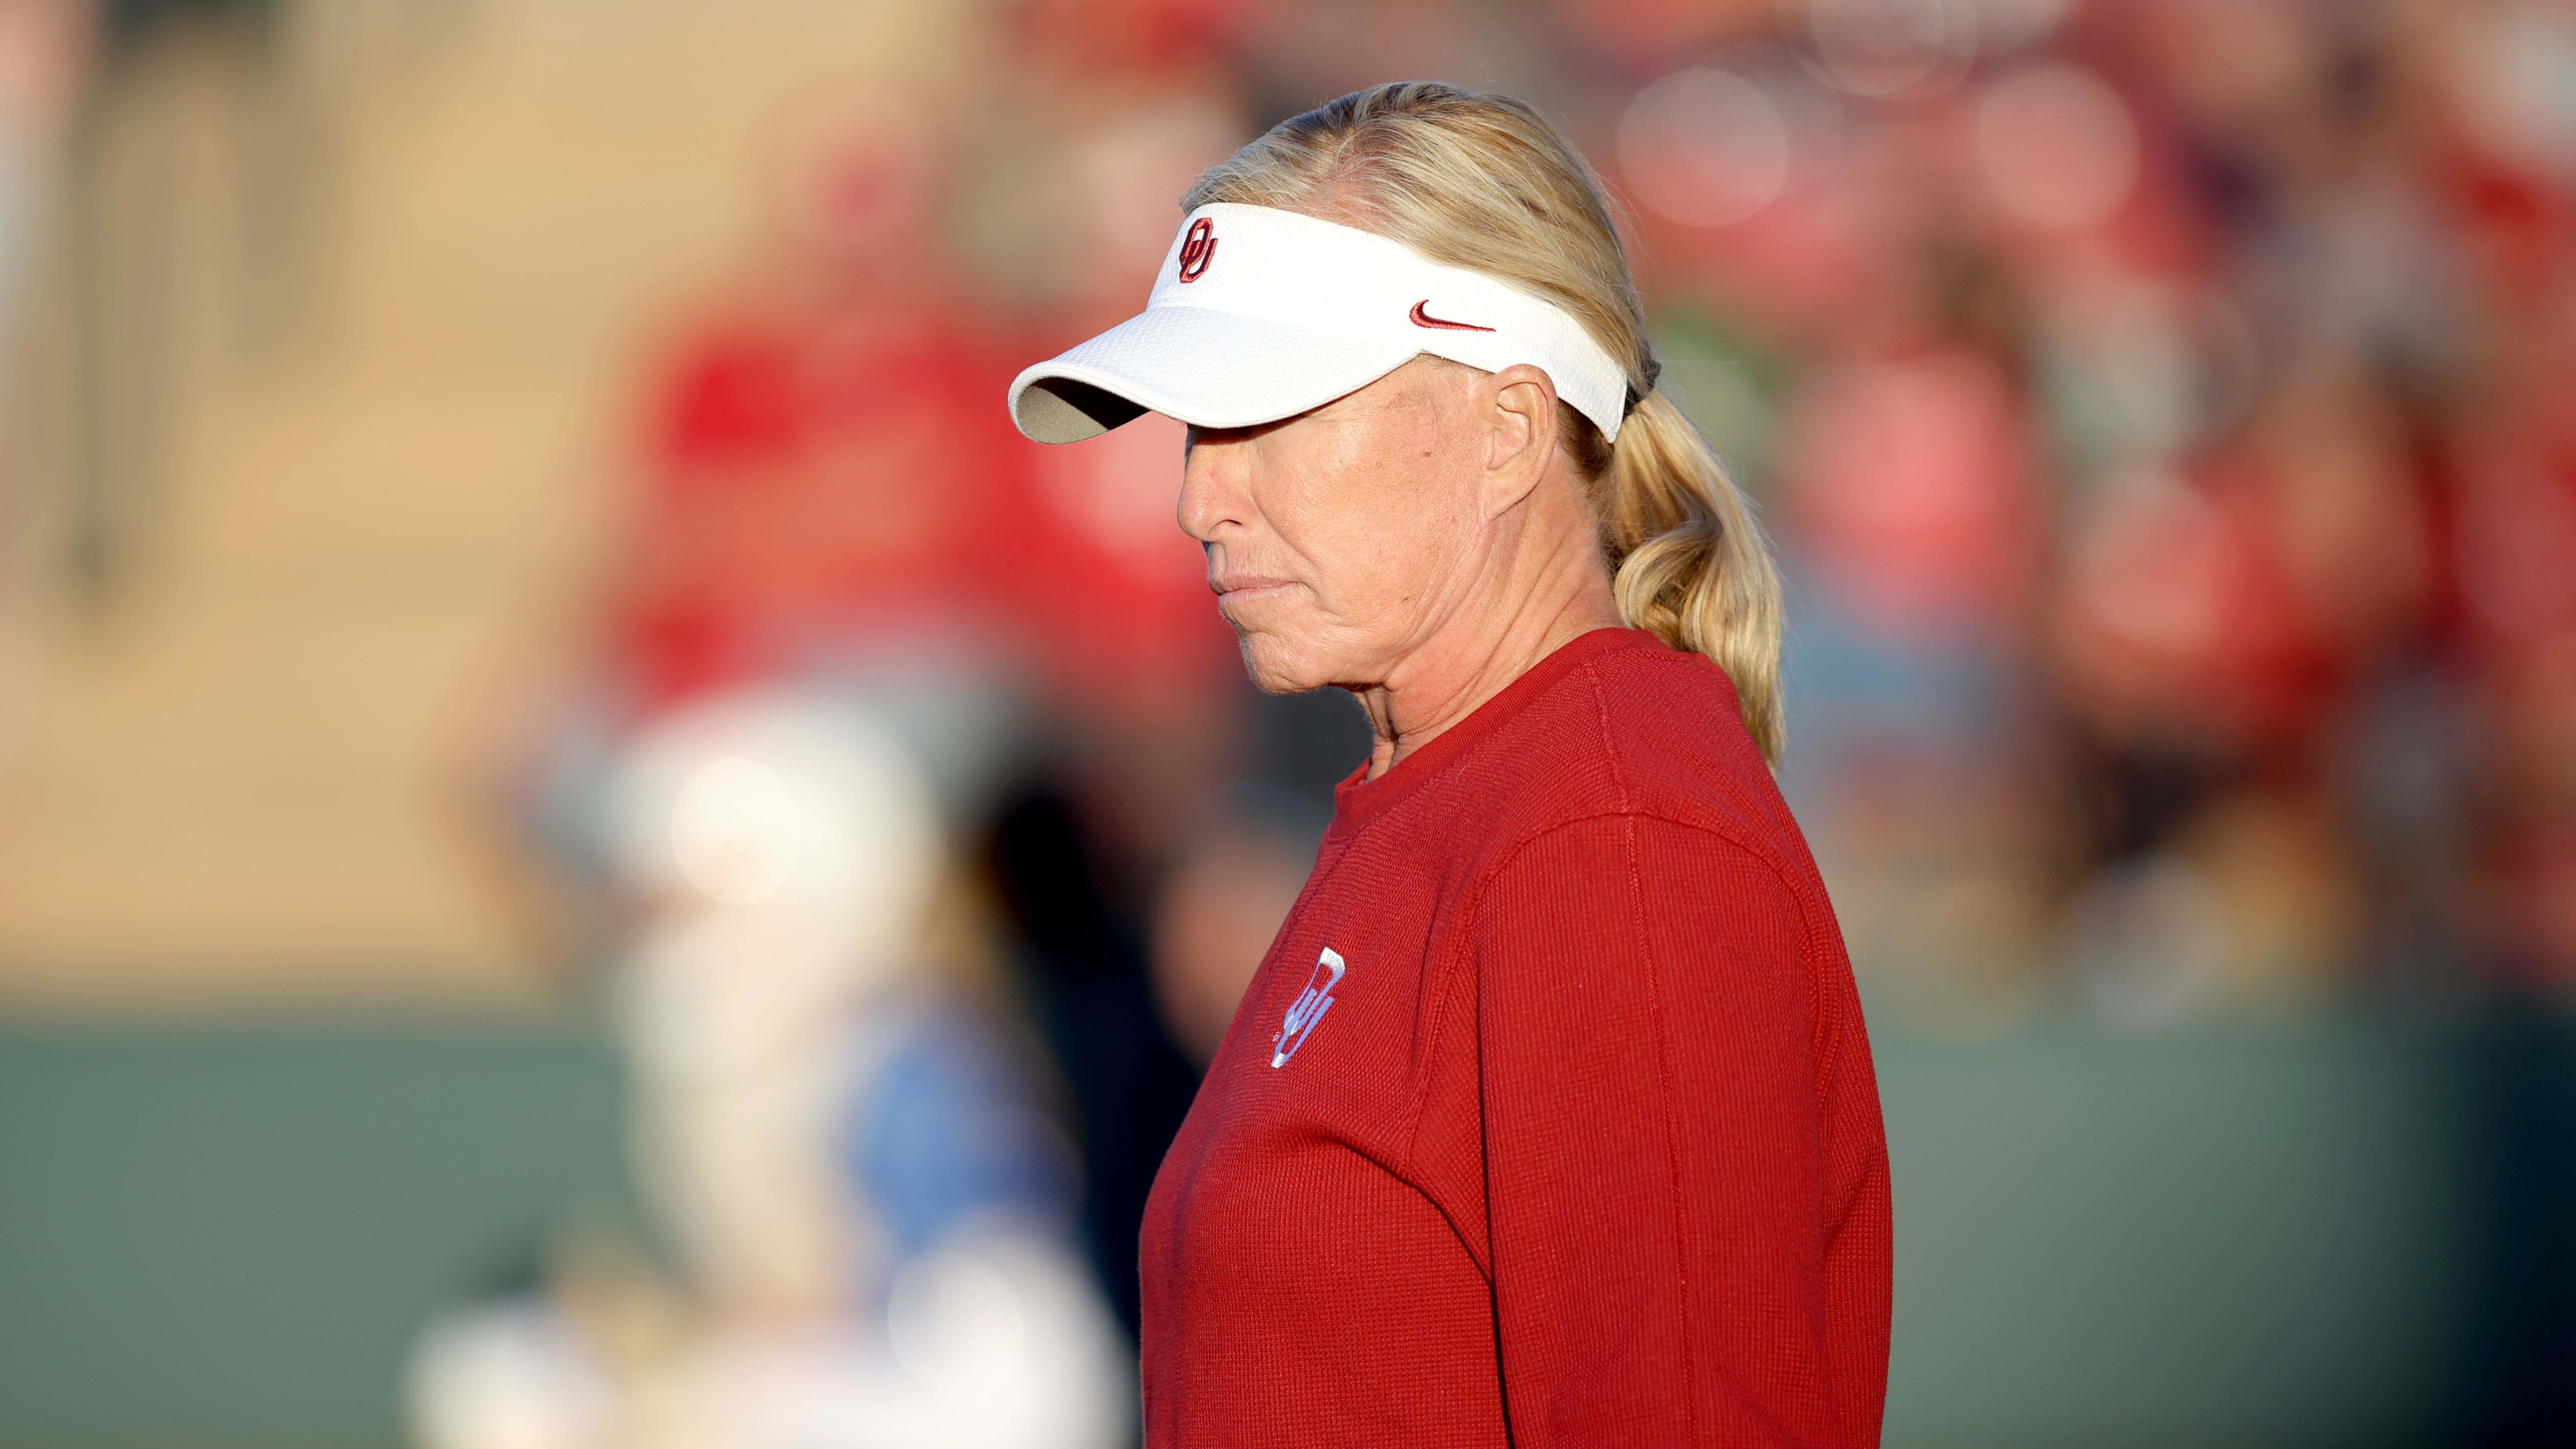 Oklahoma’s Patty Gasso: Softball’s New Replay Rules ‘Taking Away From the Excitement of the Game’